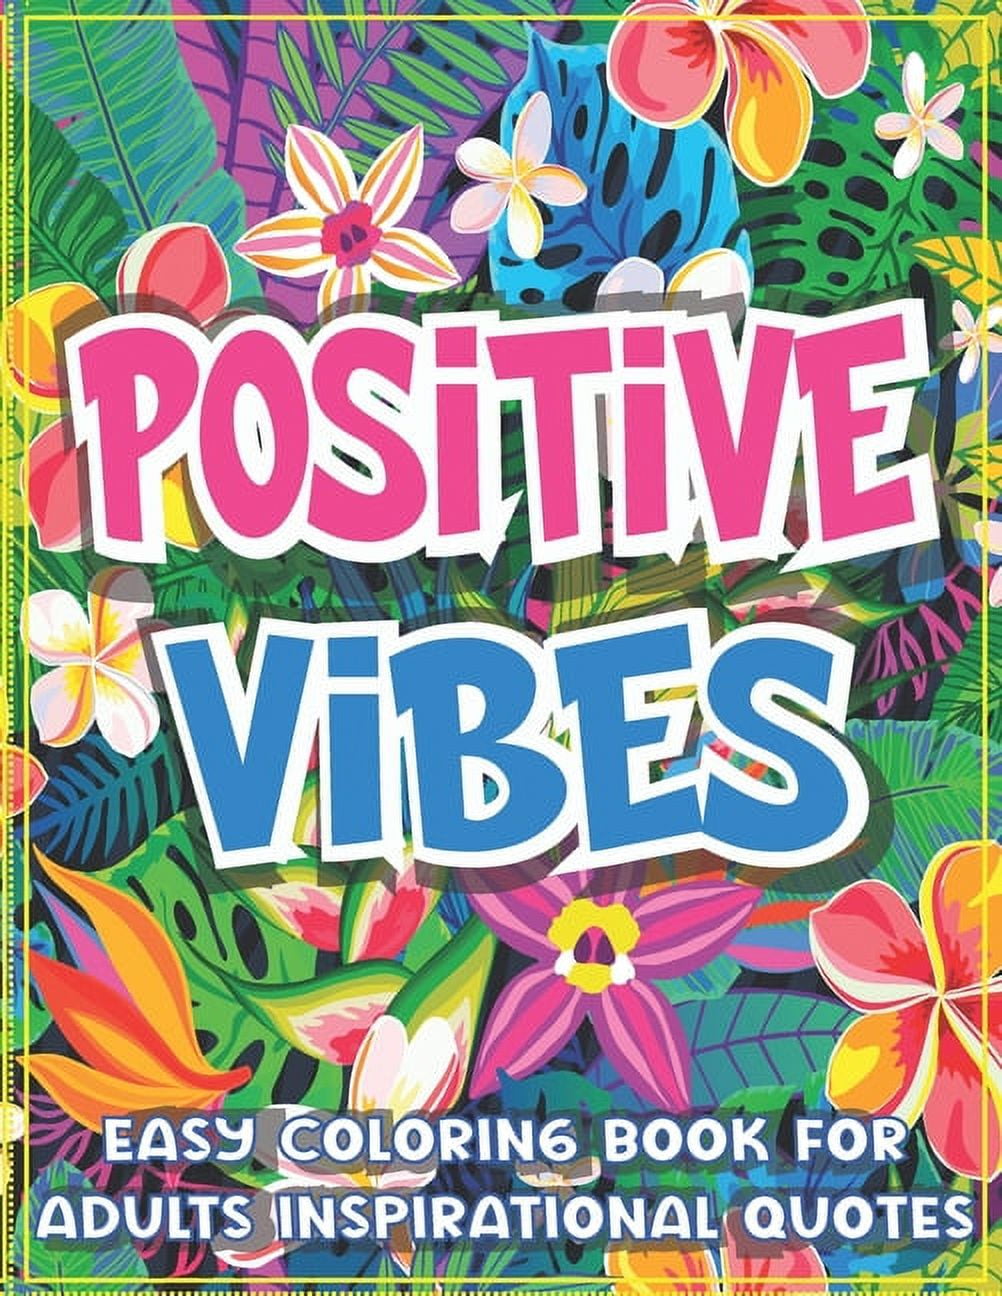  Let's Enjoy Today Easy Coloring Book for Adults: Large Print  Coloring Pages With Positive and Good Vibes Inspirational Quotes For Adult  Relaxation And Stress Relief: 9798512395639: Modern Shamslights: Books